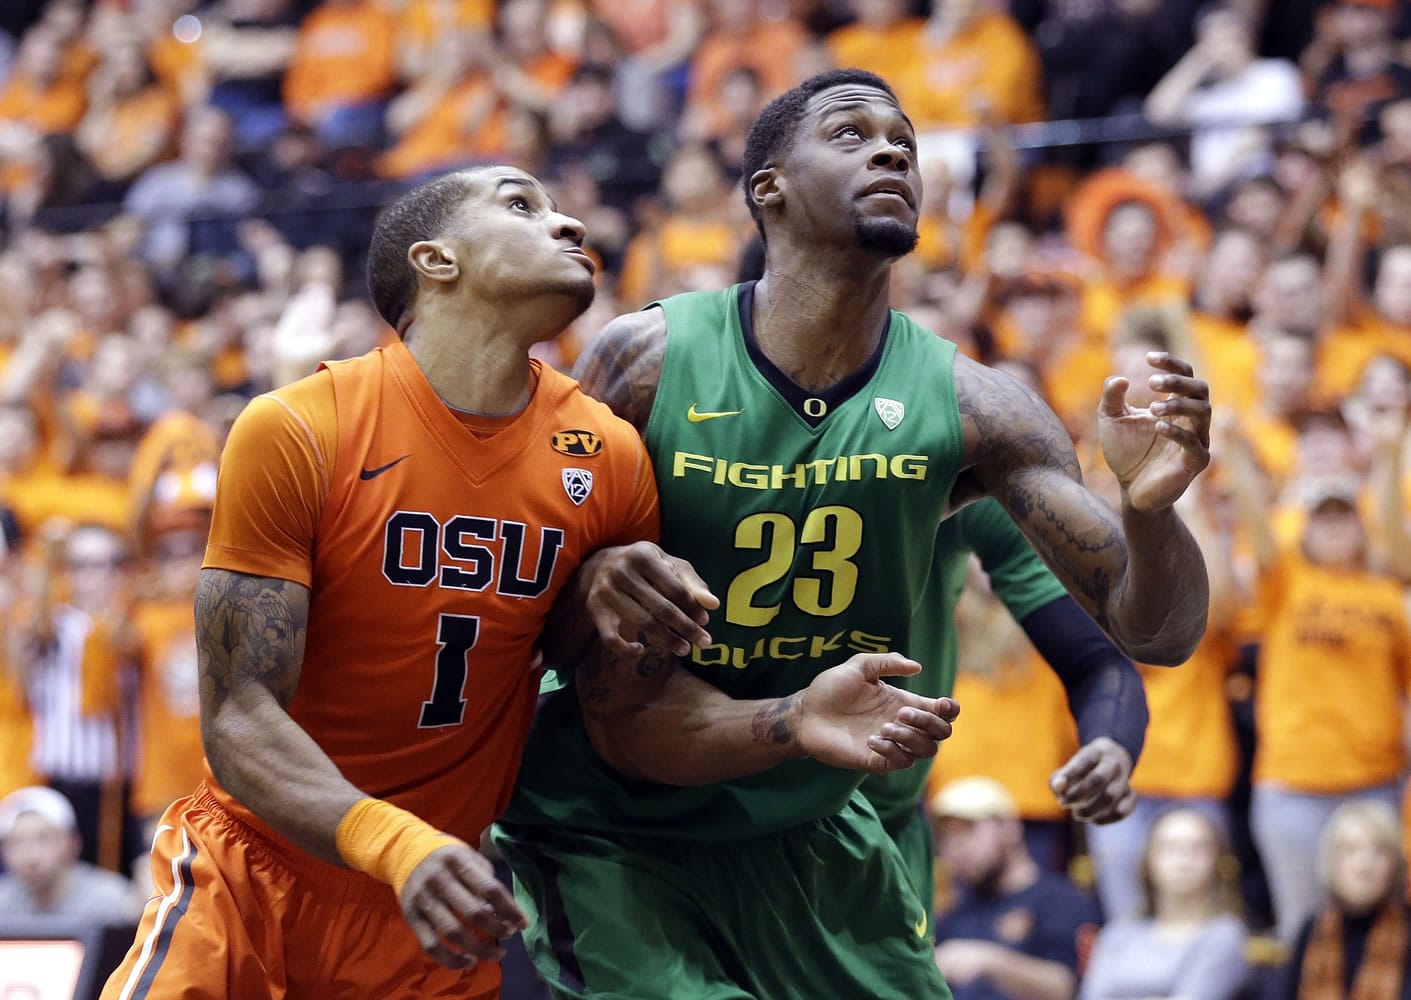 Oregon forward Elgin Cook, right, jockeys for position with Oregon State guard Gary Payton II during the second half in Corvallis, Ore., Wednesday, March 4, 2015. Cook led Oregon in scoring with 17 points as they beat Oregon State 65-62.